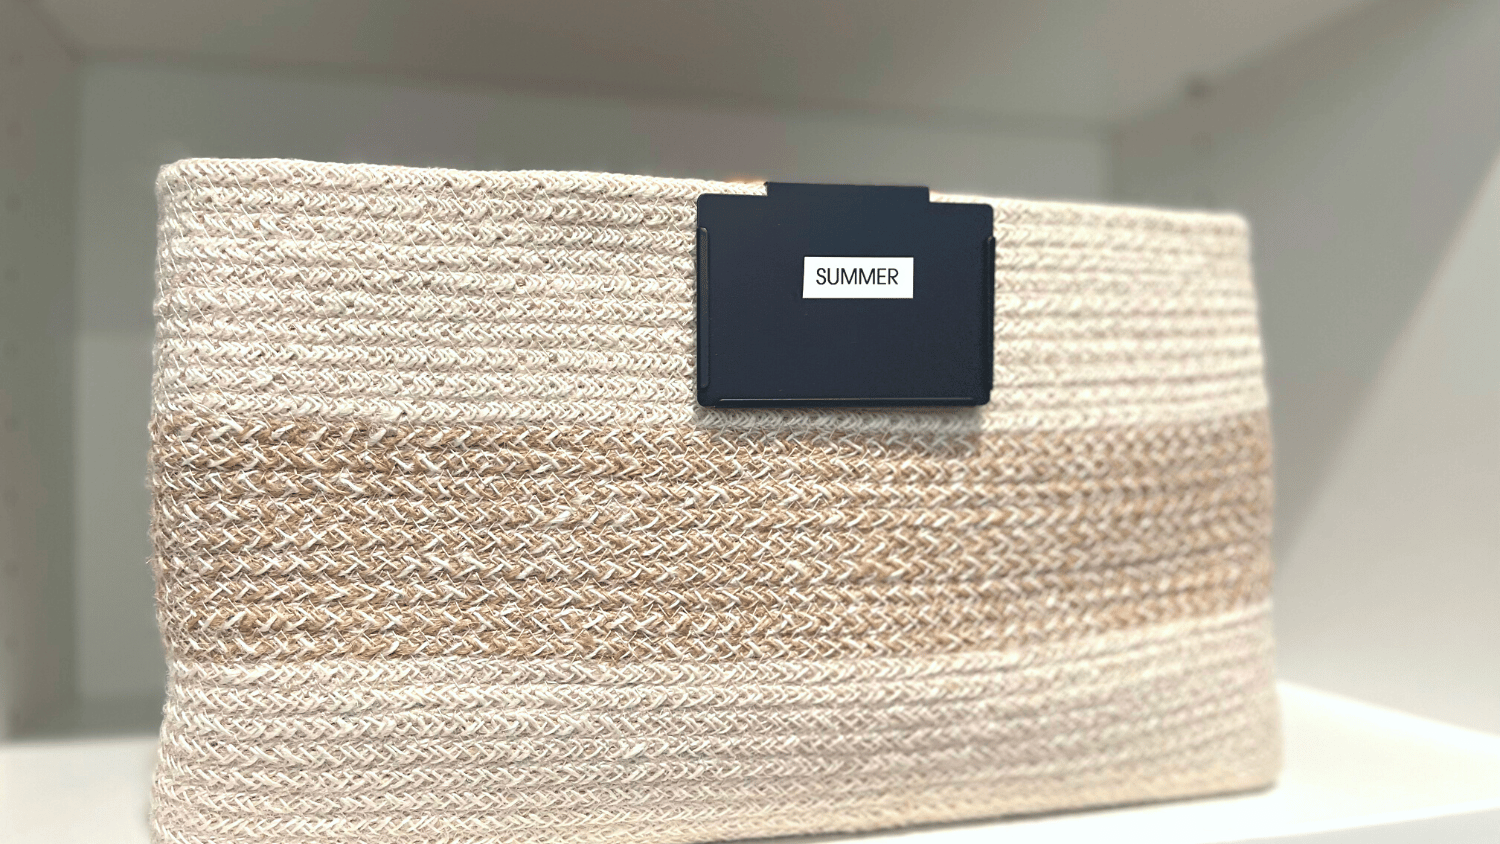 The Container Store Jute Natural Basket with black label